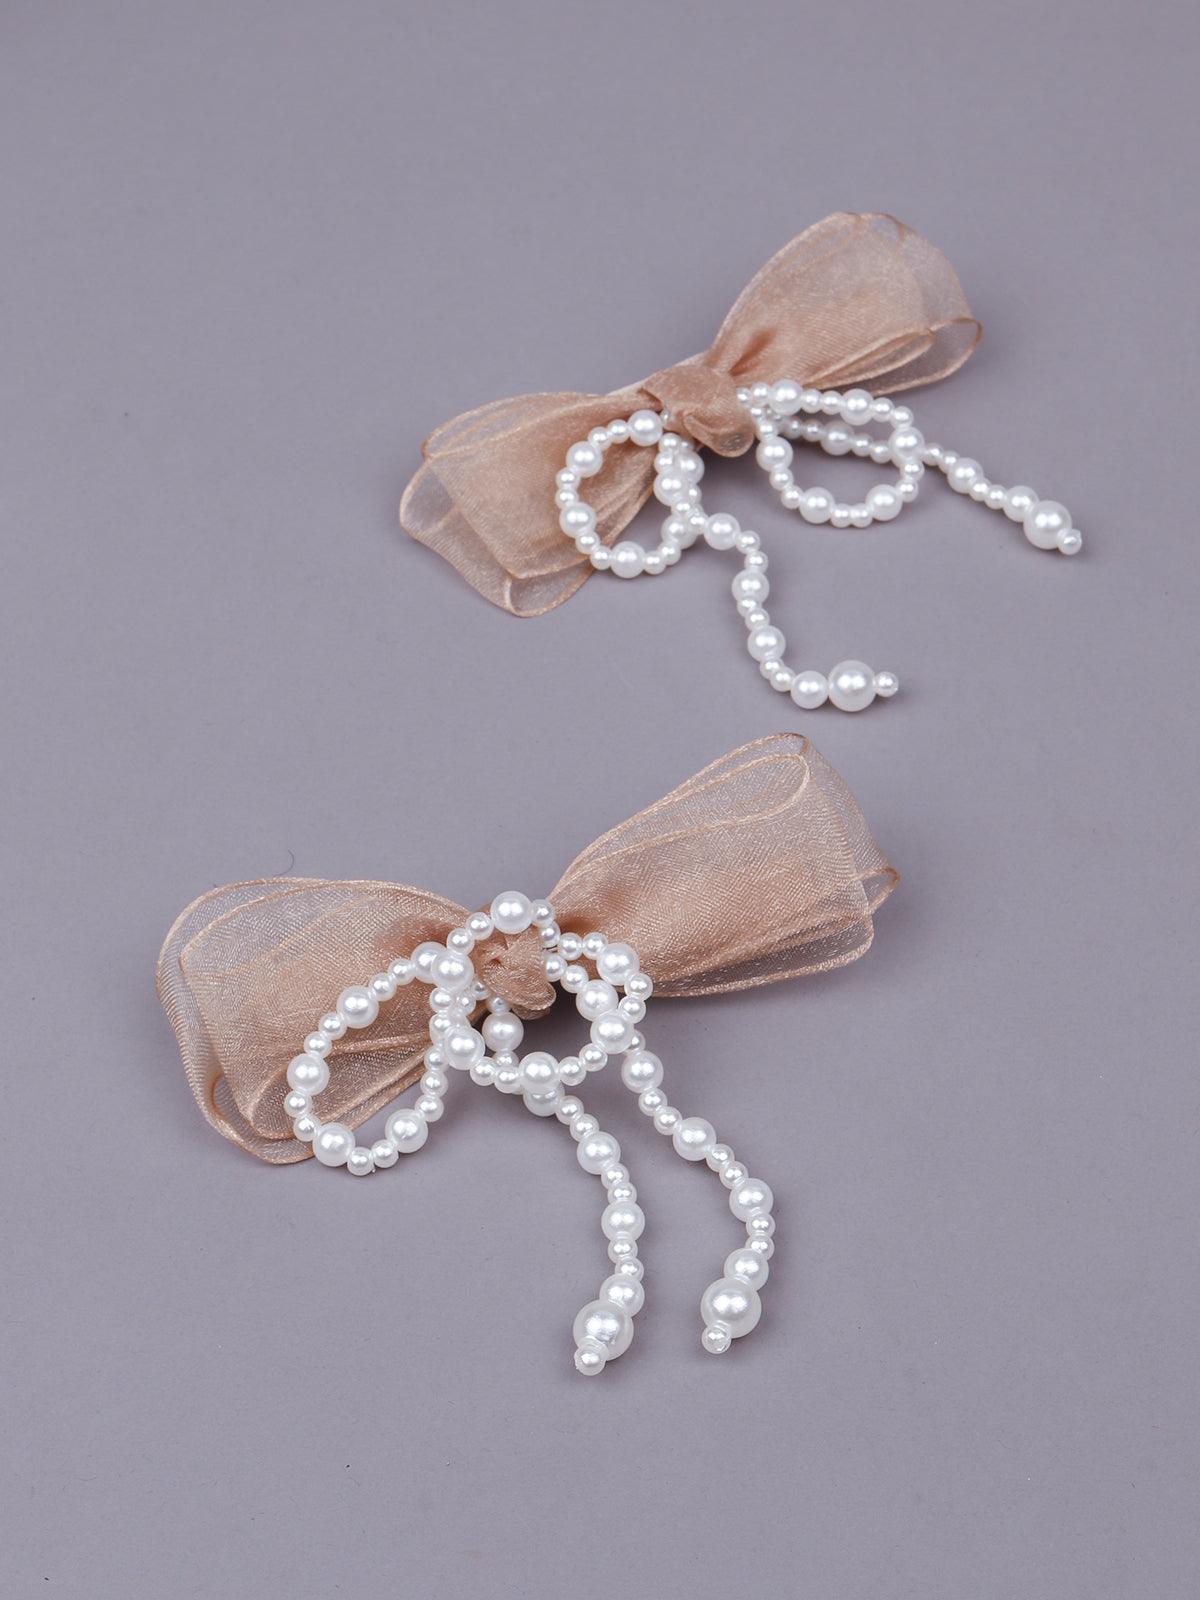 Beige bow embellished with artificial pearls hair clips - Odette